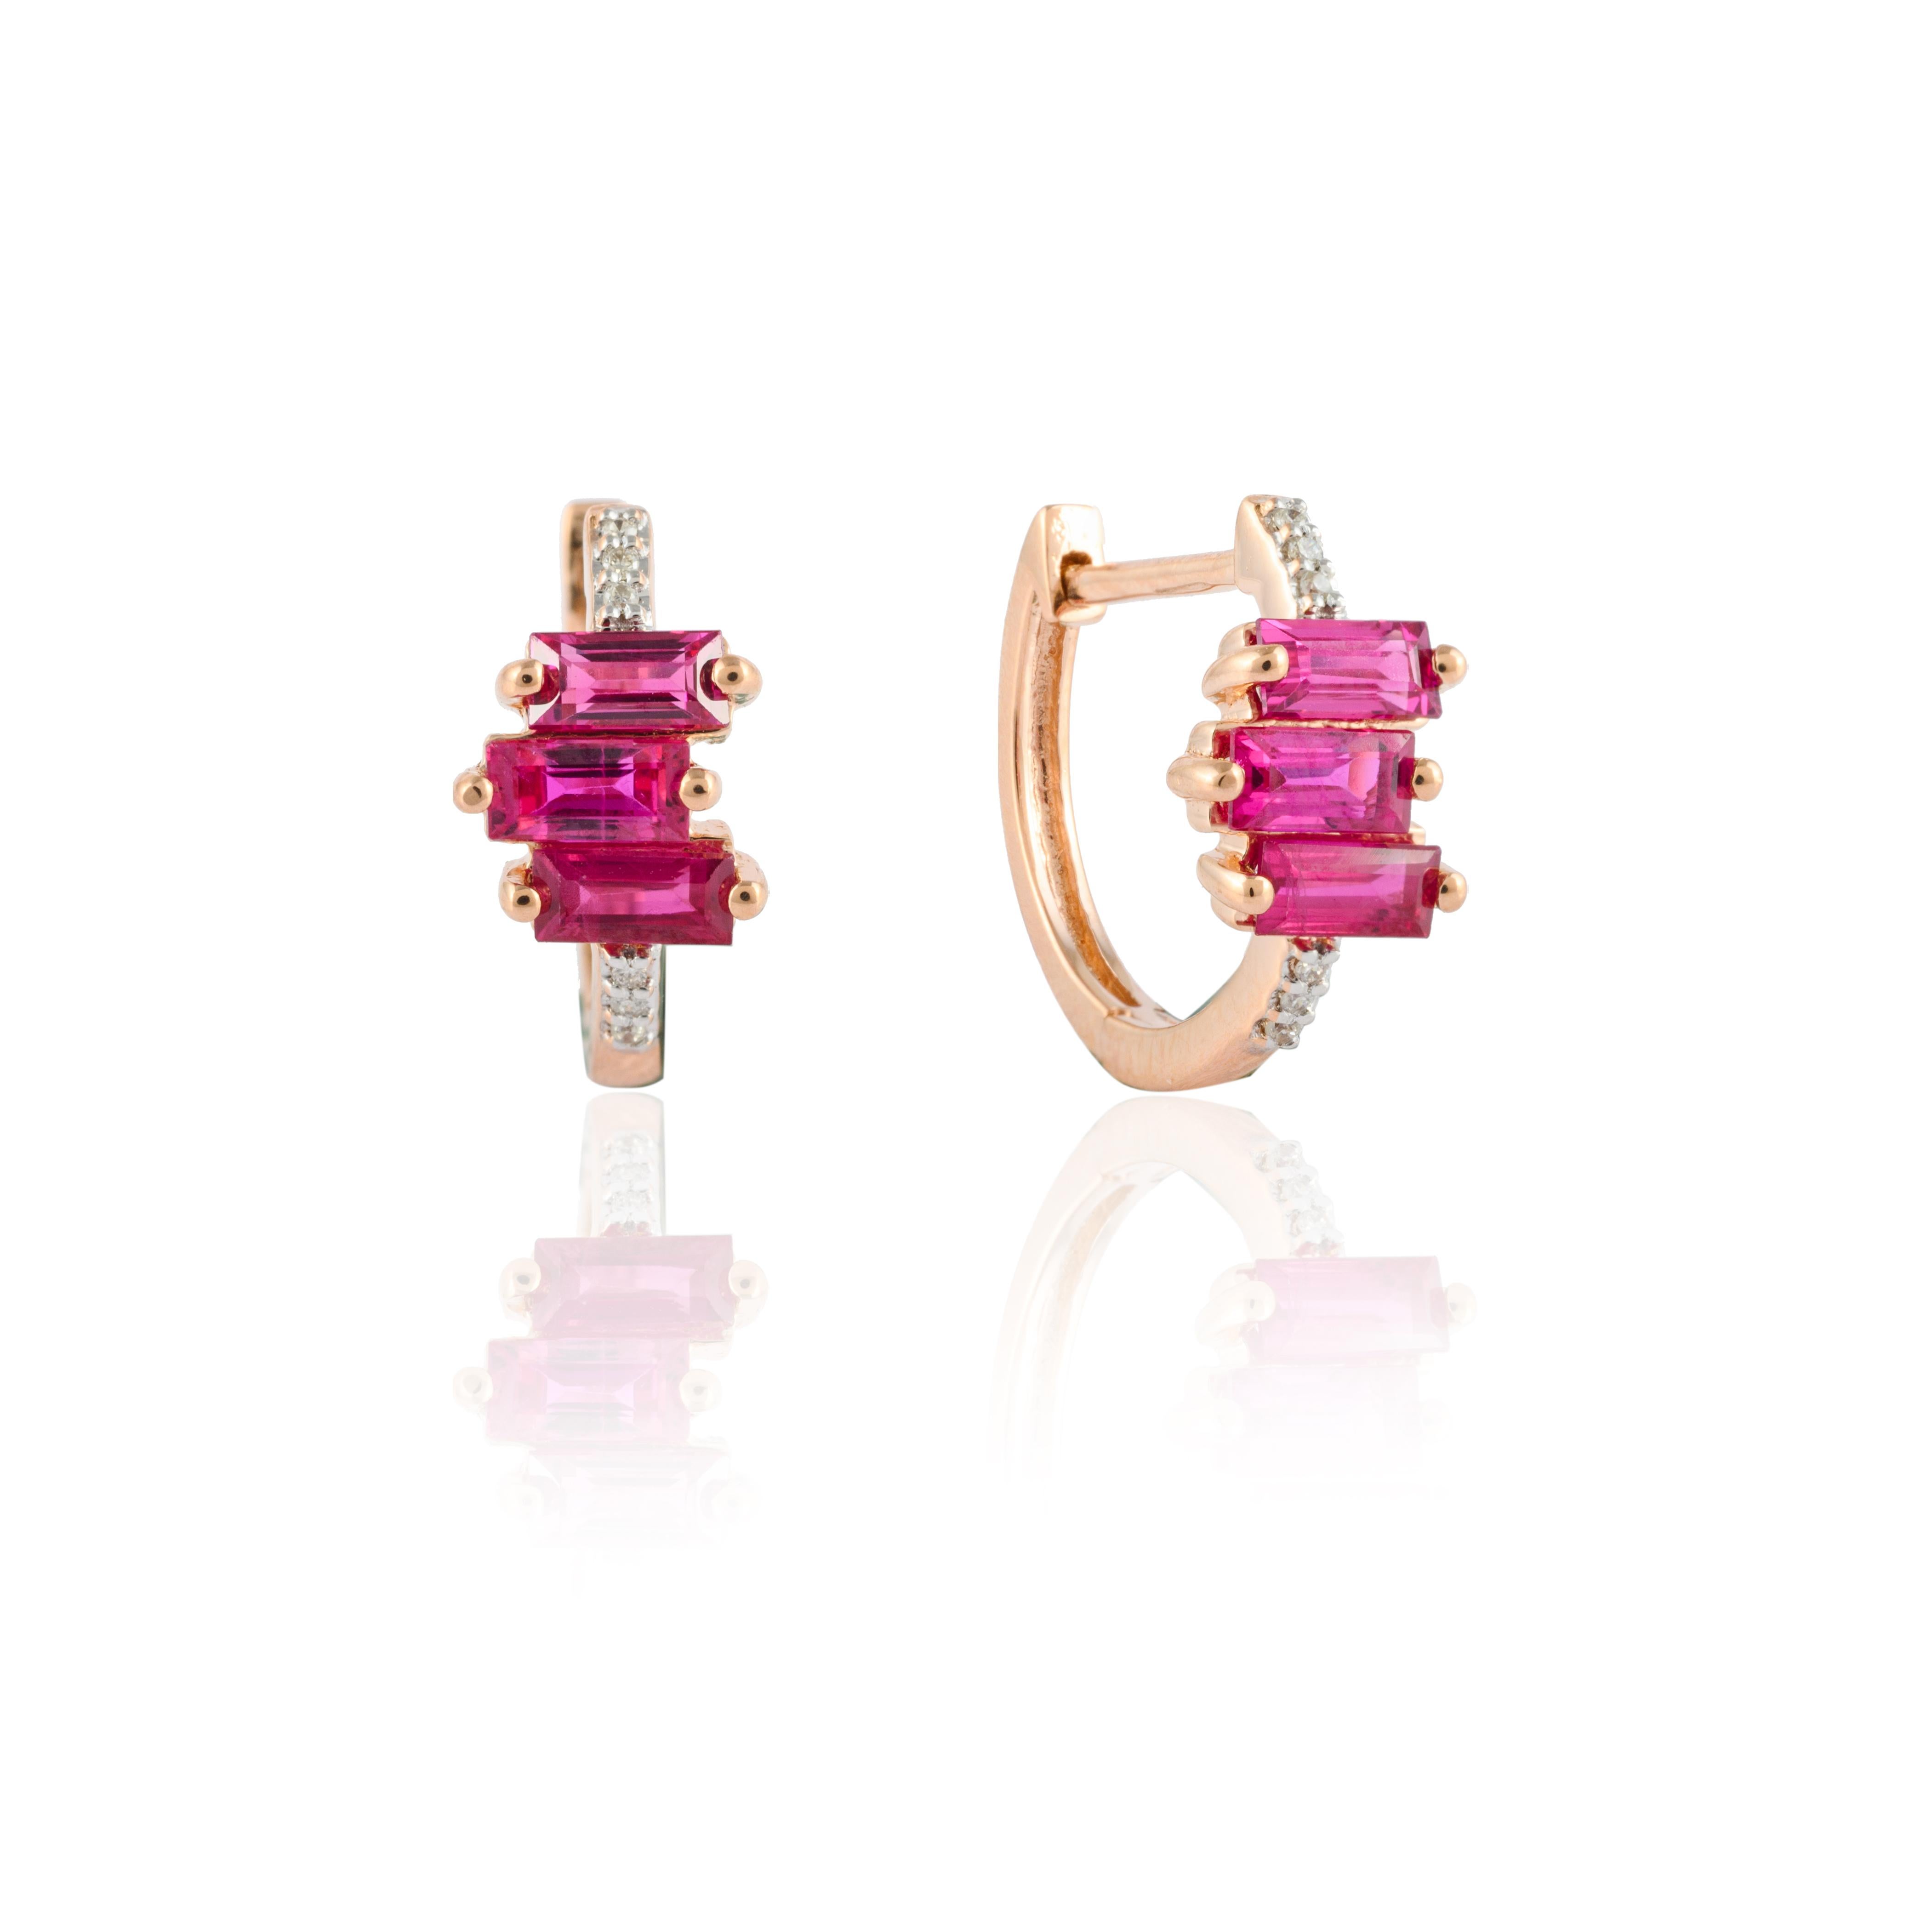 Baguette Cut Minimalist Ruby Diamond Huggie Earrings in 18k Solid Rose Gold Gift For Her For Sale